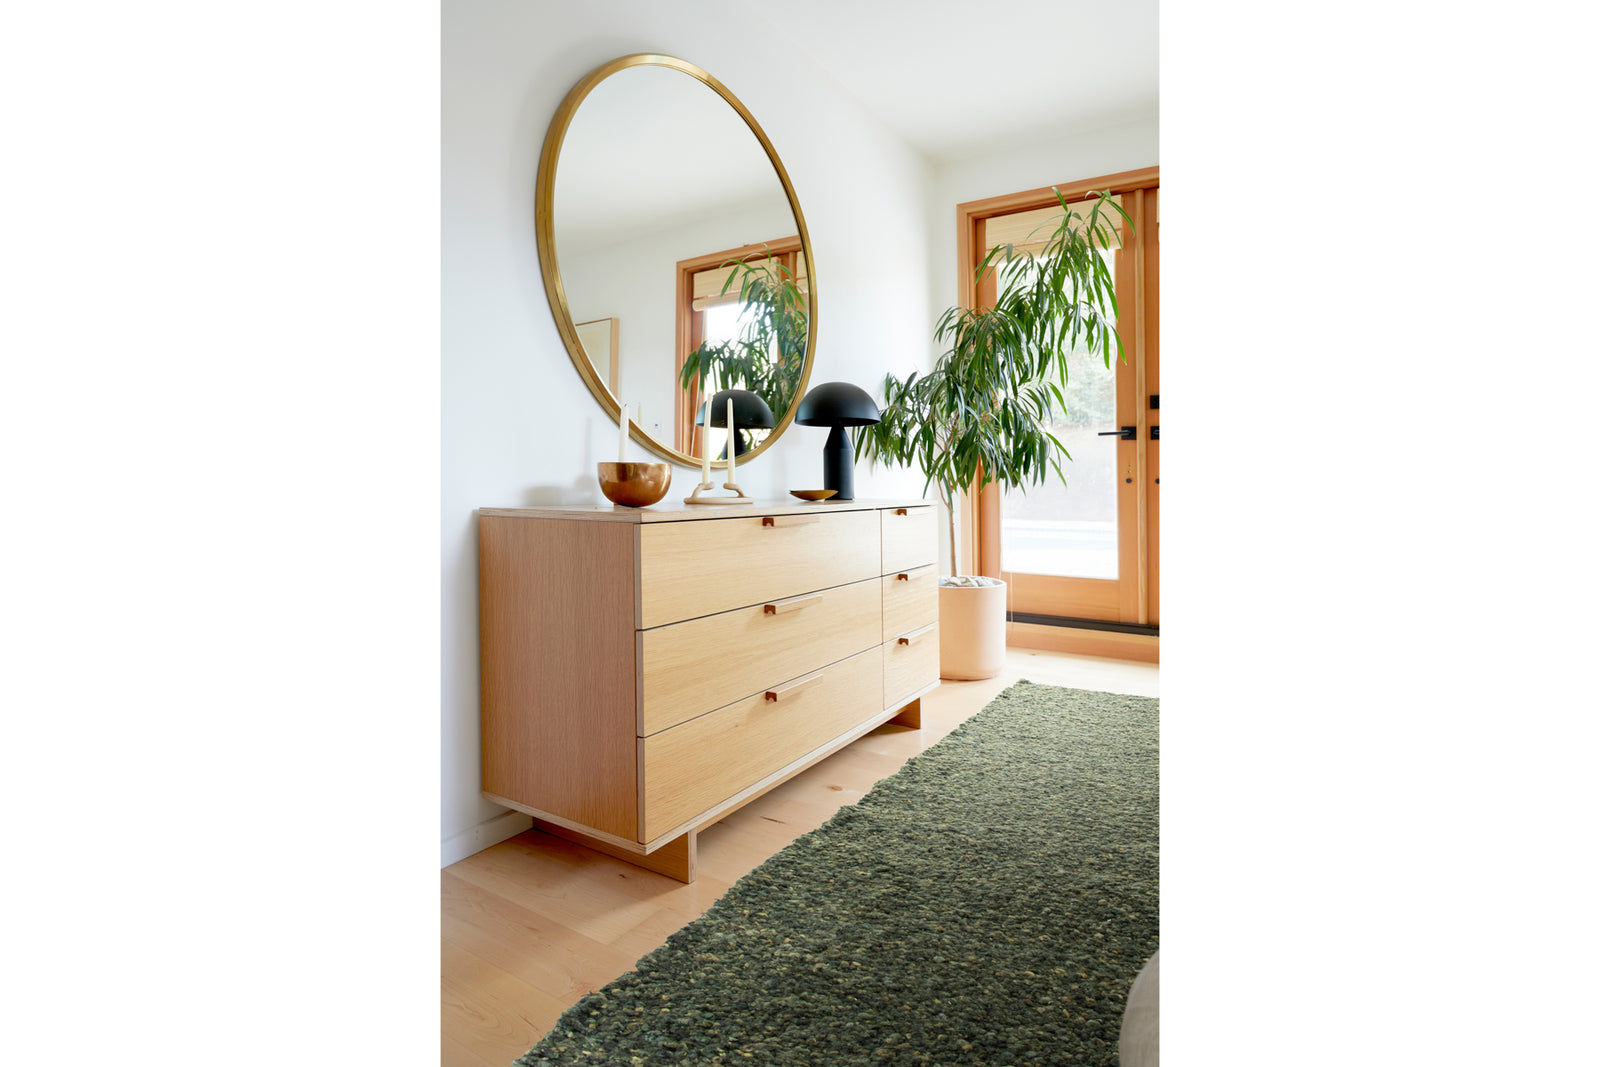 Sweater rug in forest BHN